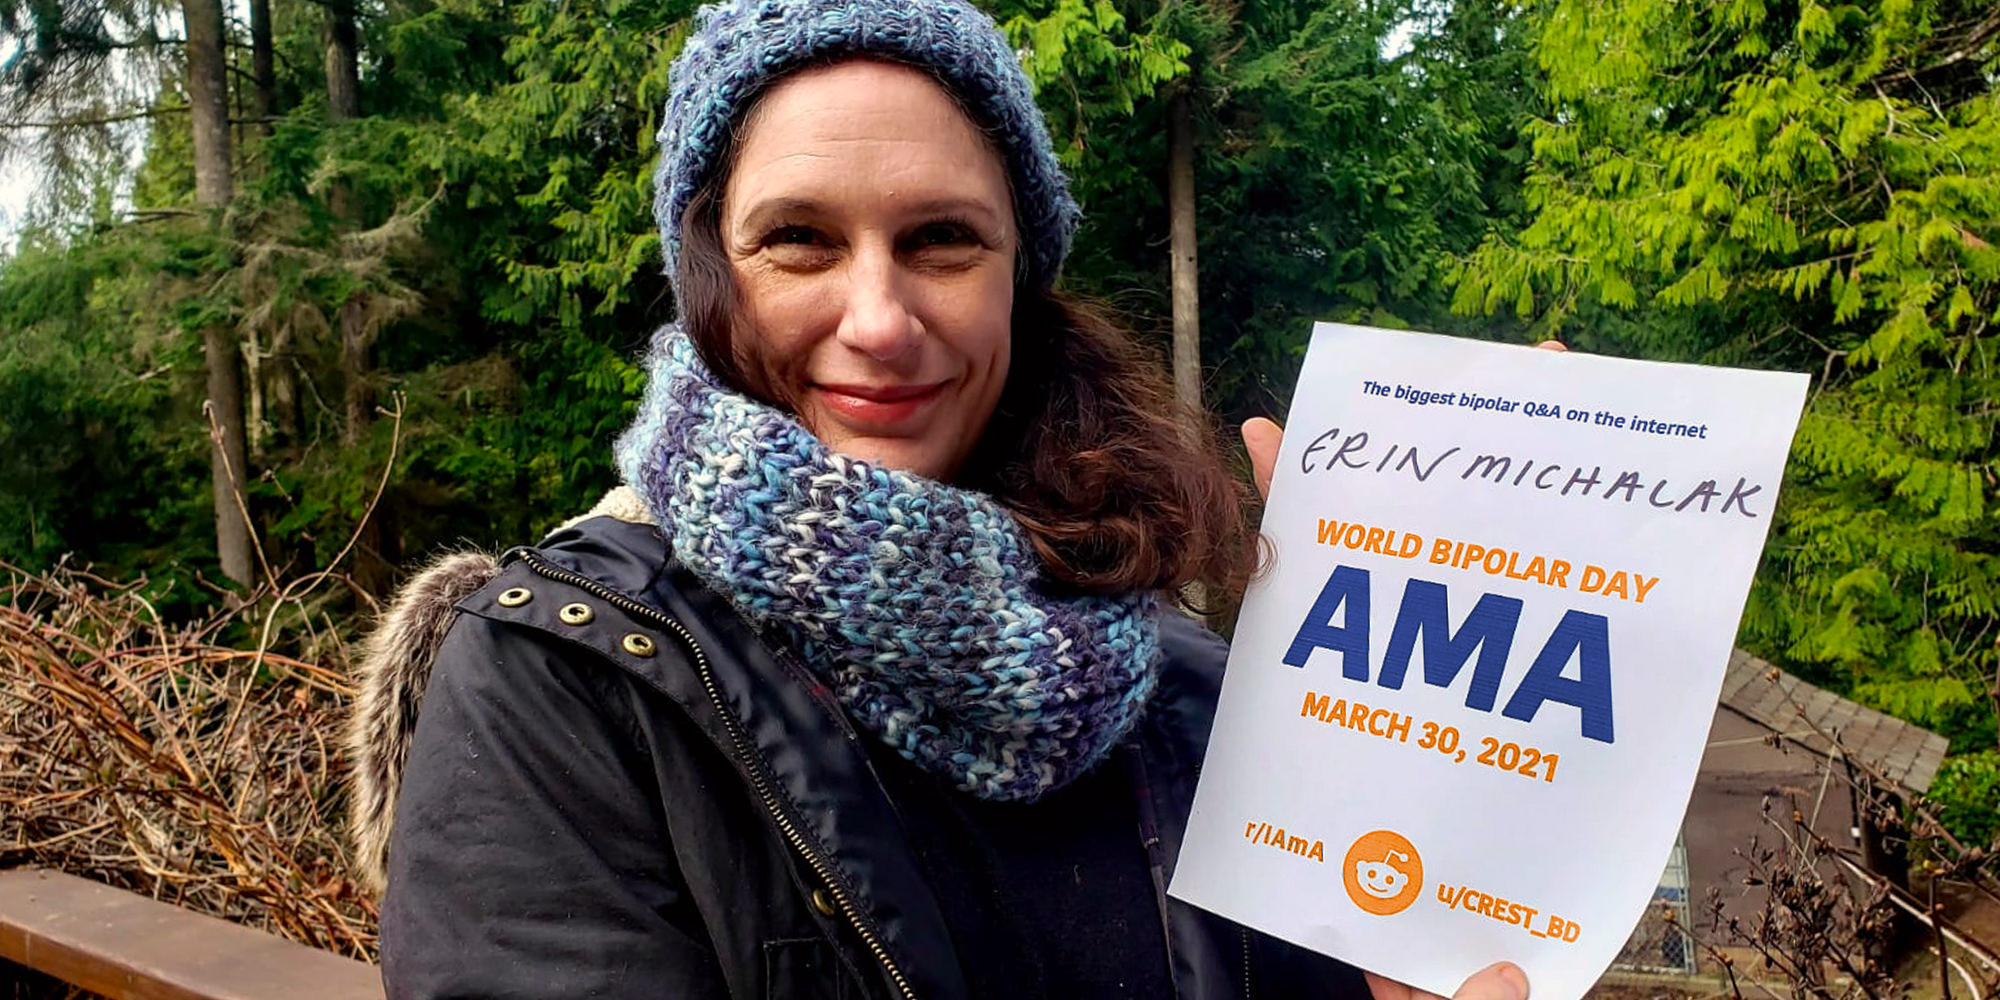 Erin outdoors in a forest. She is Caucasian and has curly dark brown hair. She's wearing a blue knitted hat with a matching scarf and a black jacket. She is smiling warmly and holding a sign proving she will be involved in the bipolar ama, with her name and the AMA date and time on it.